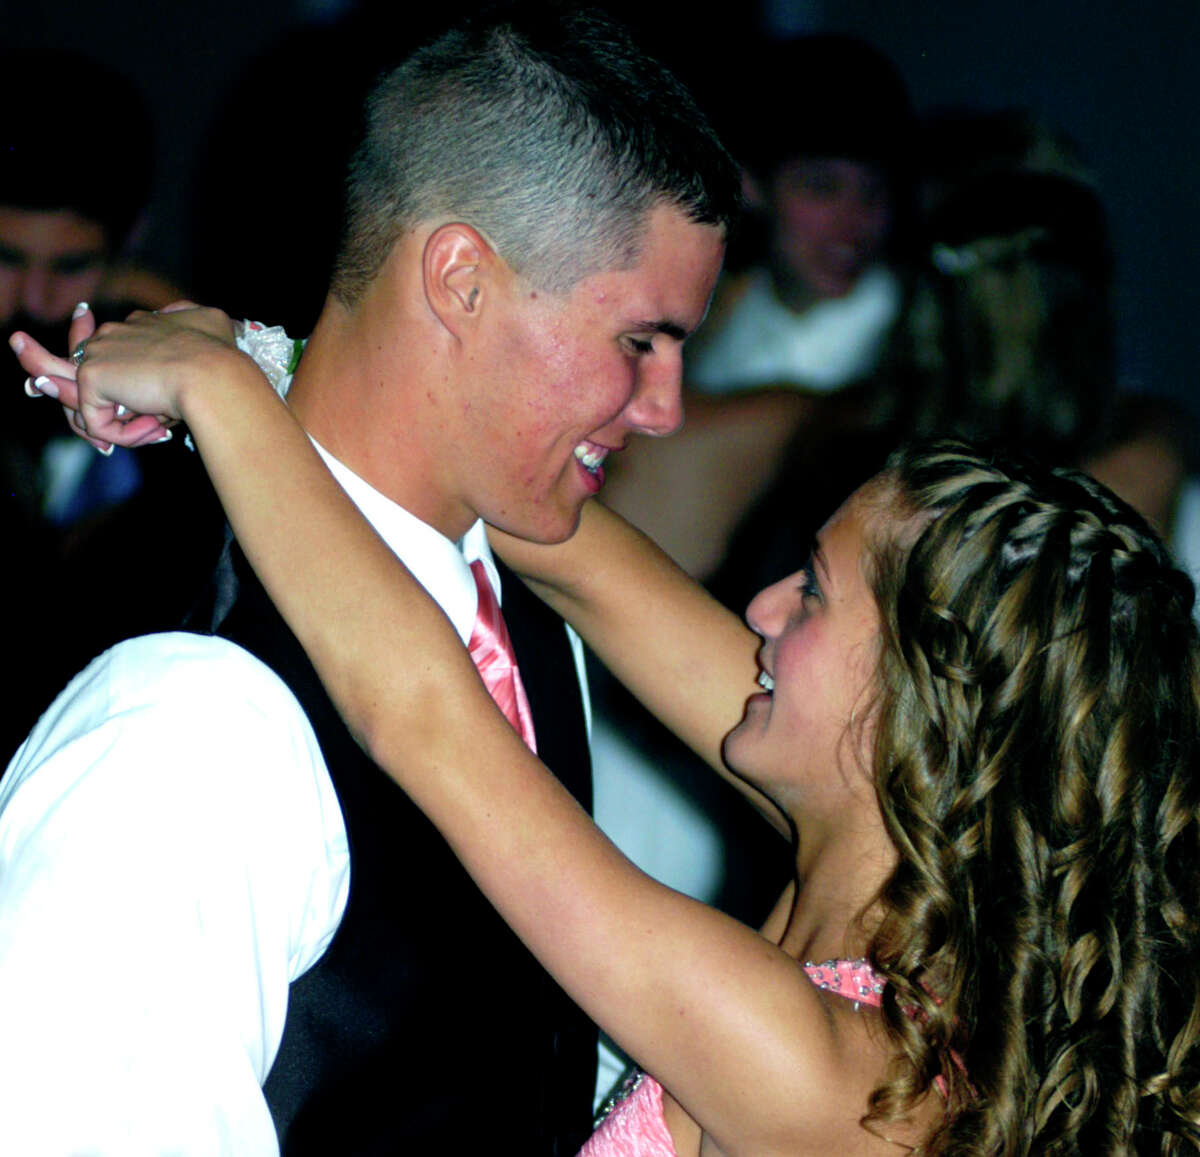 Austin Kisling and Alexandra Scorza share a dance at the New Milford High School senior prom, "Under The Big Top," May 19, 2012 at the Amber Room Colonnade in Danbury.